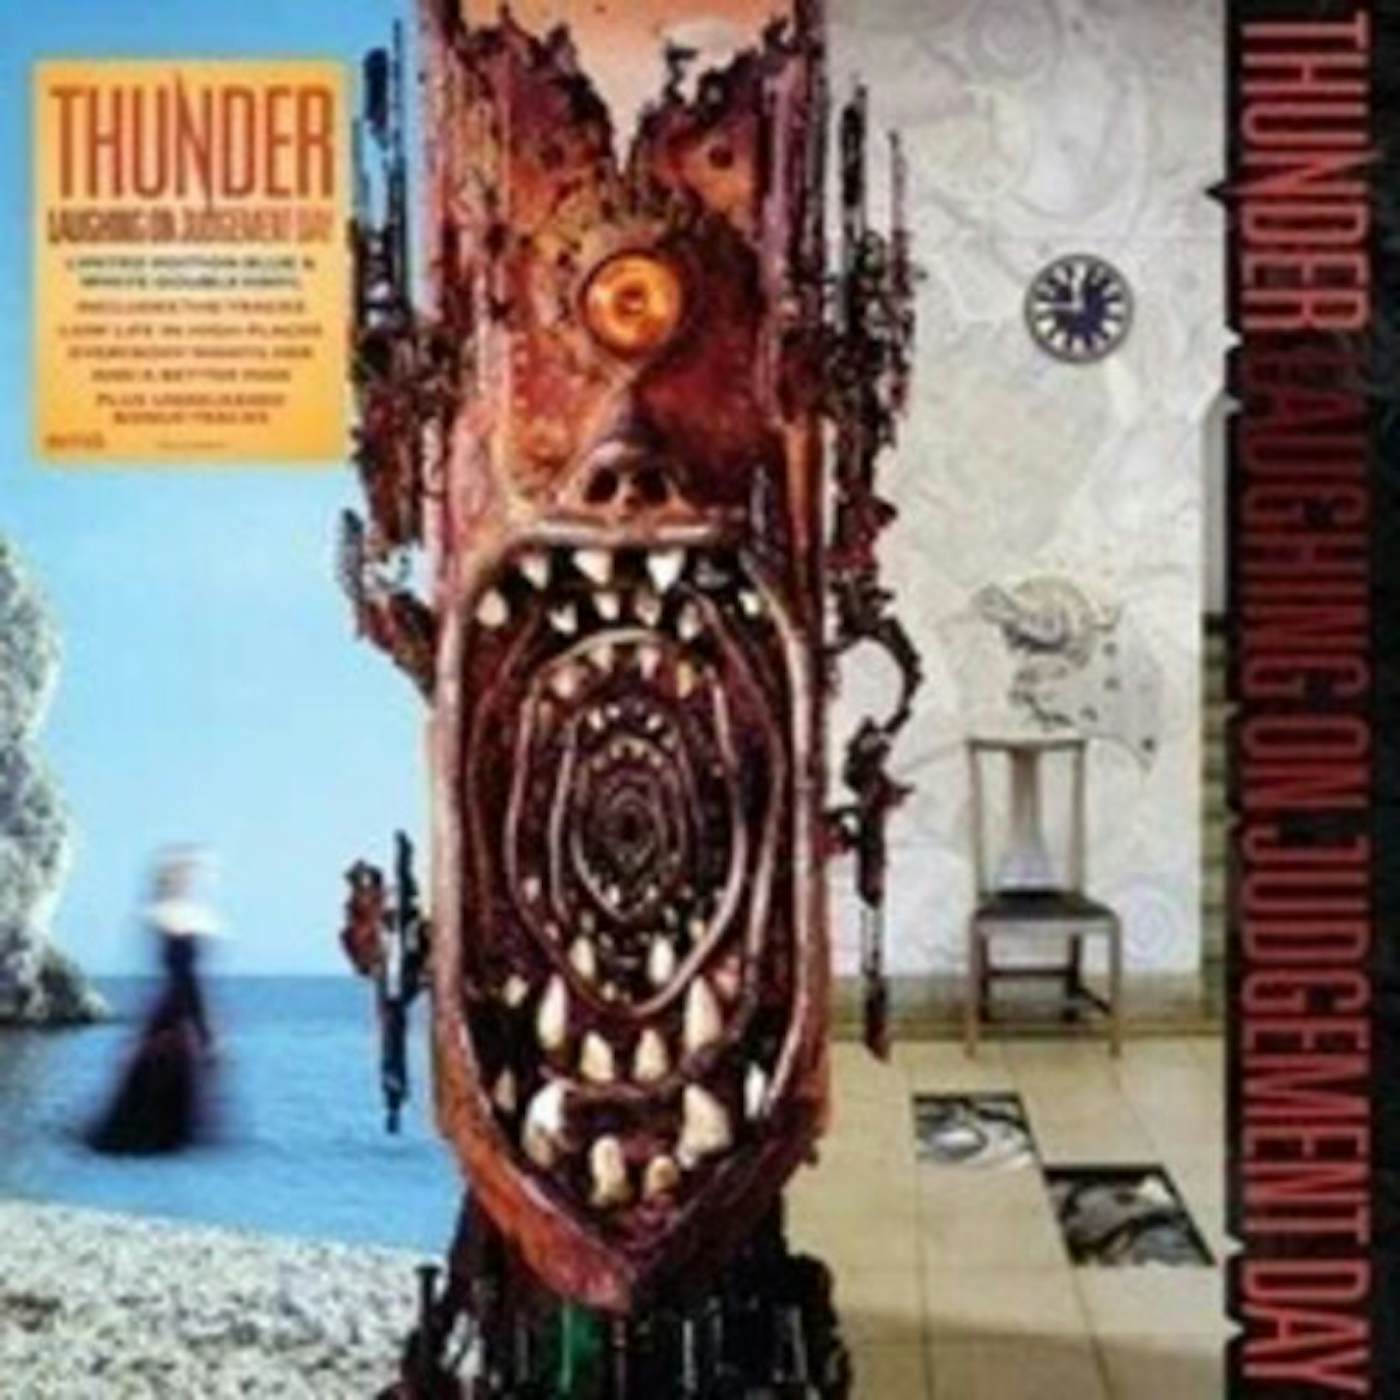 Thunder LAUGHING ON JUDGEMENT DAY CD